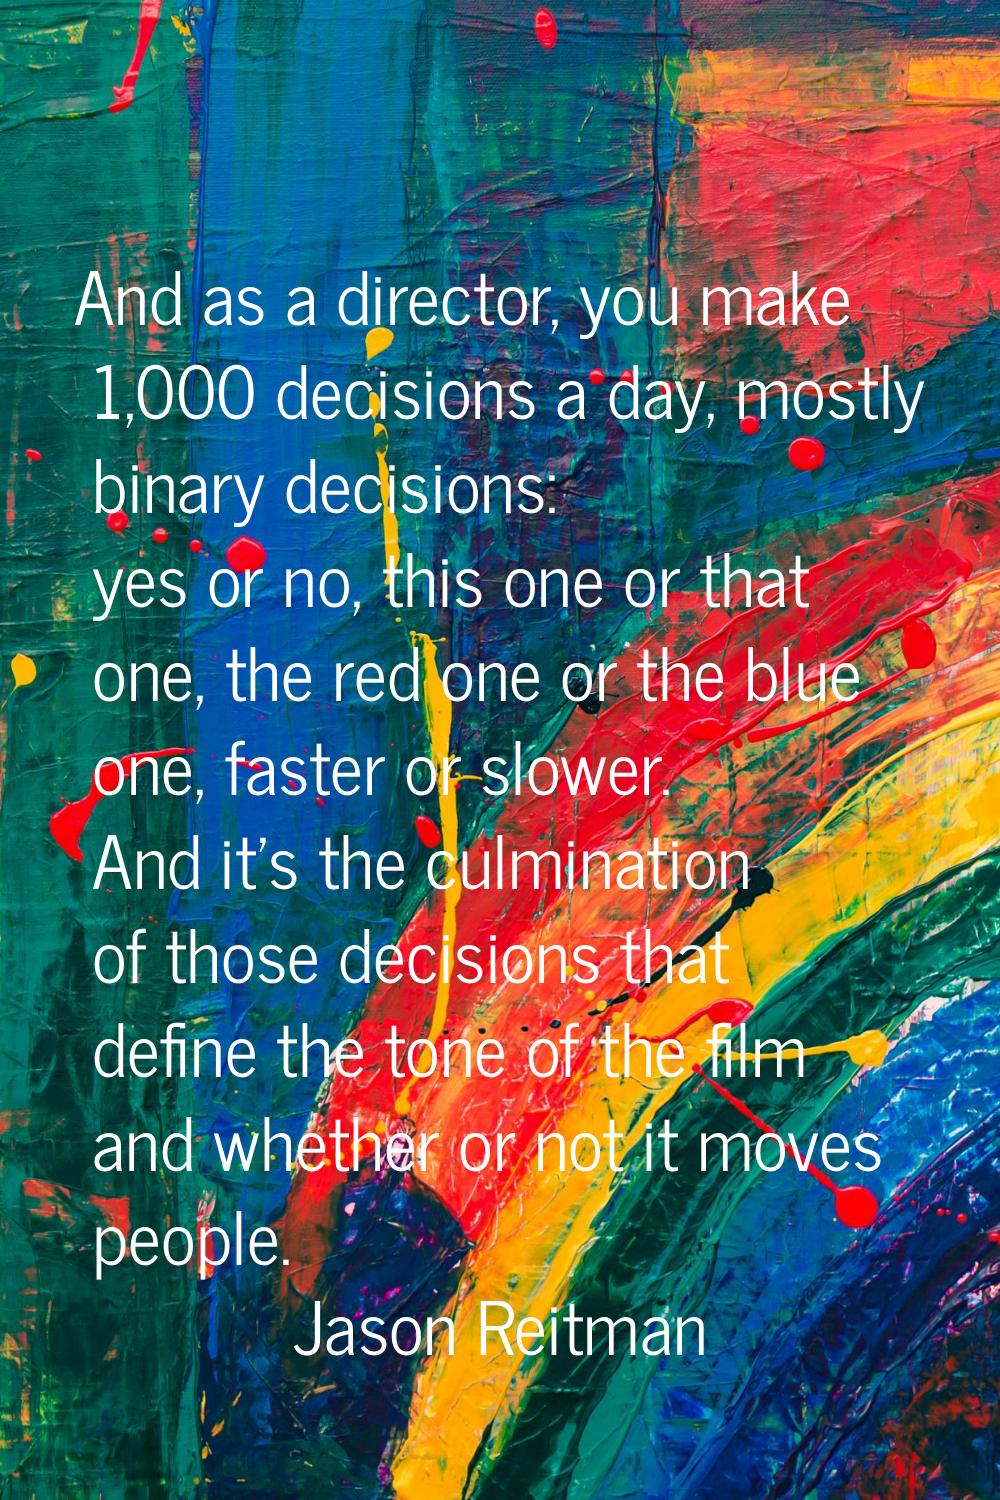 And as a director, you make 1,000 decisions a day, mostly binary decisions: yes or no, this one or 